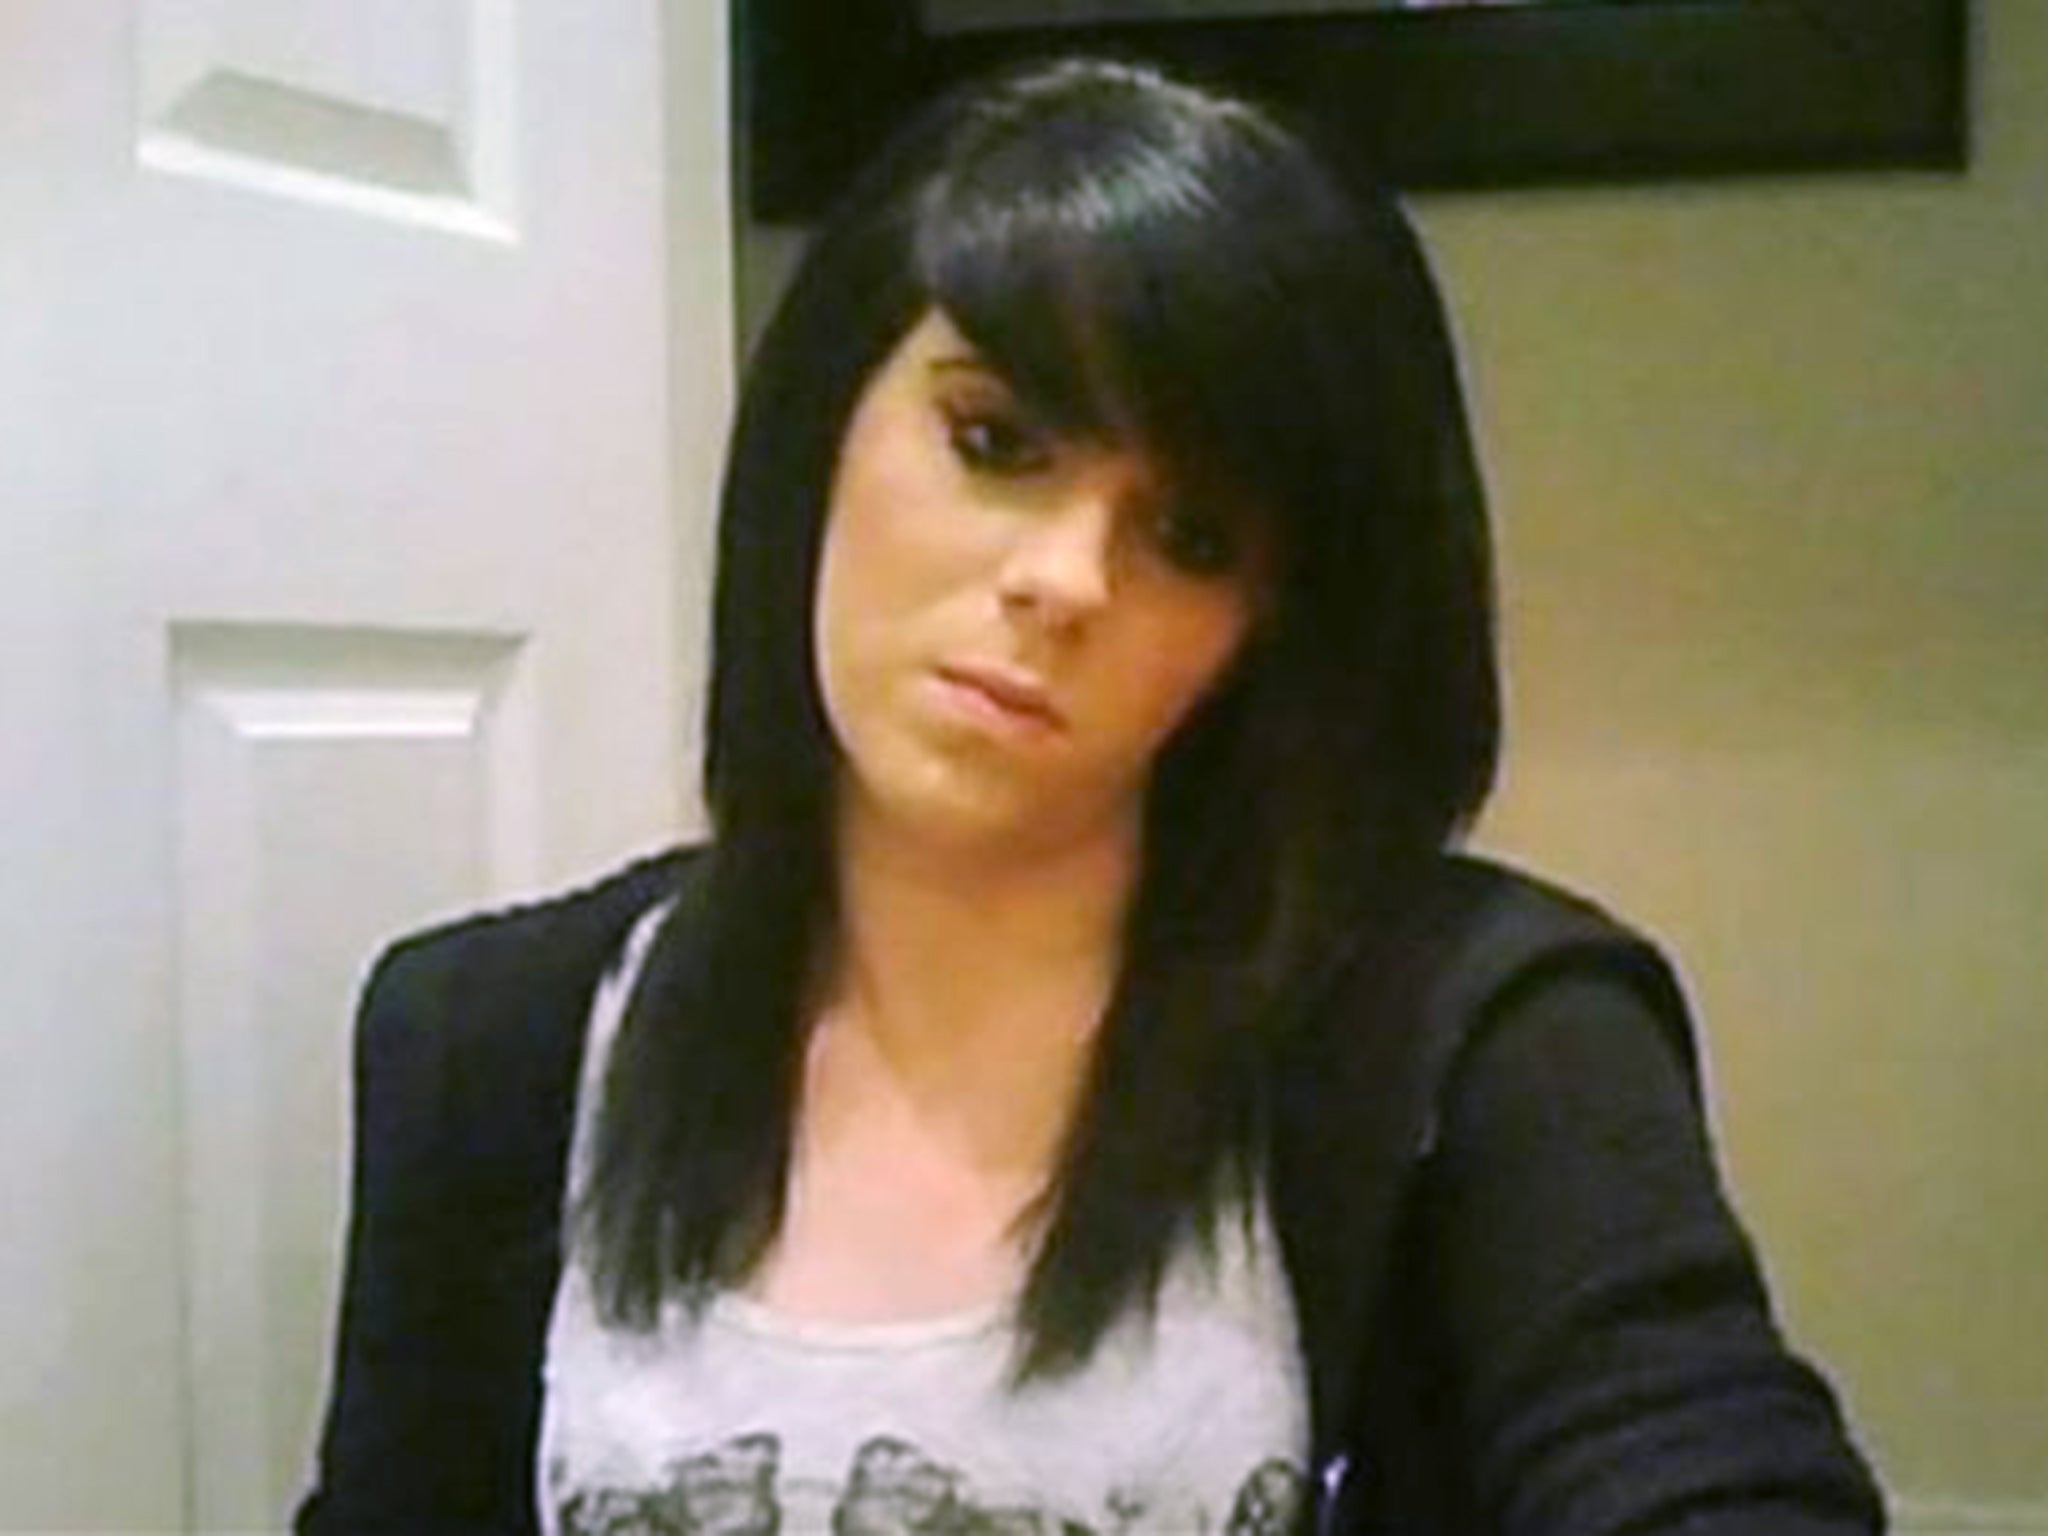 The inquest into Vikki Thompson’s death determined that she did not intend to take her own life